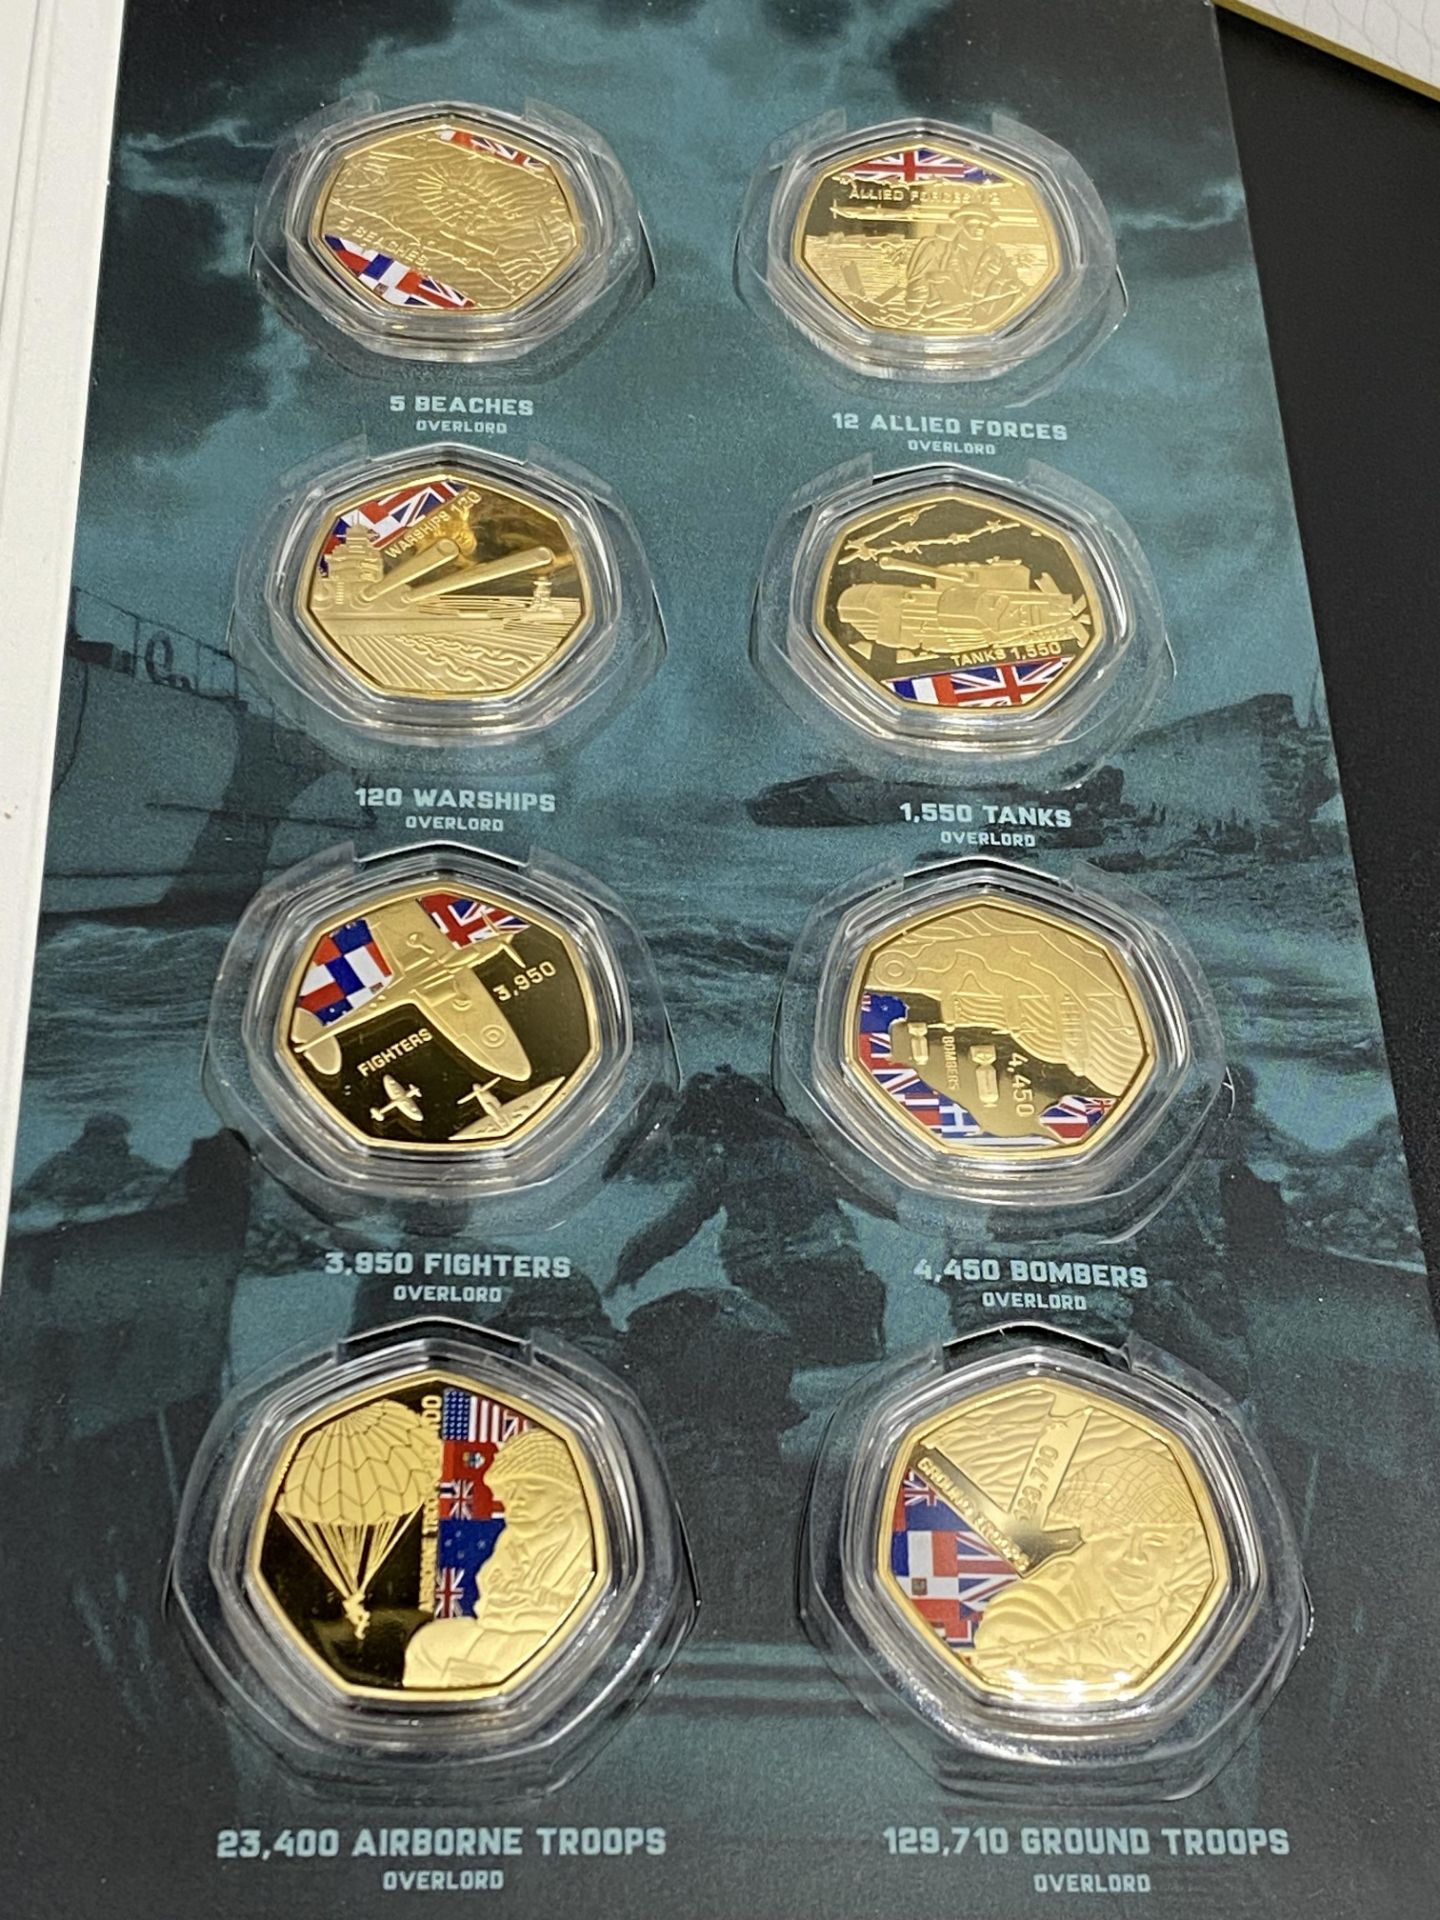 Queen's coronation 65th anniversary and Operation Overlord D-Day 75 coin collection - Image 3 of 10